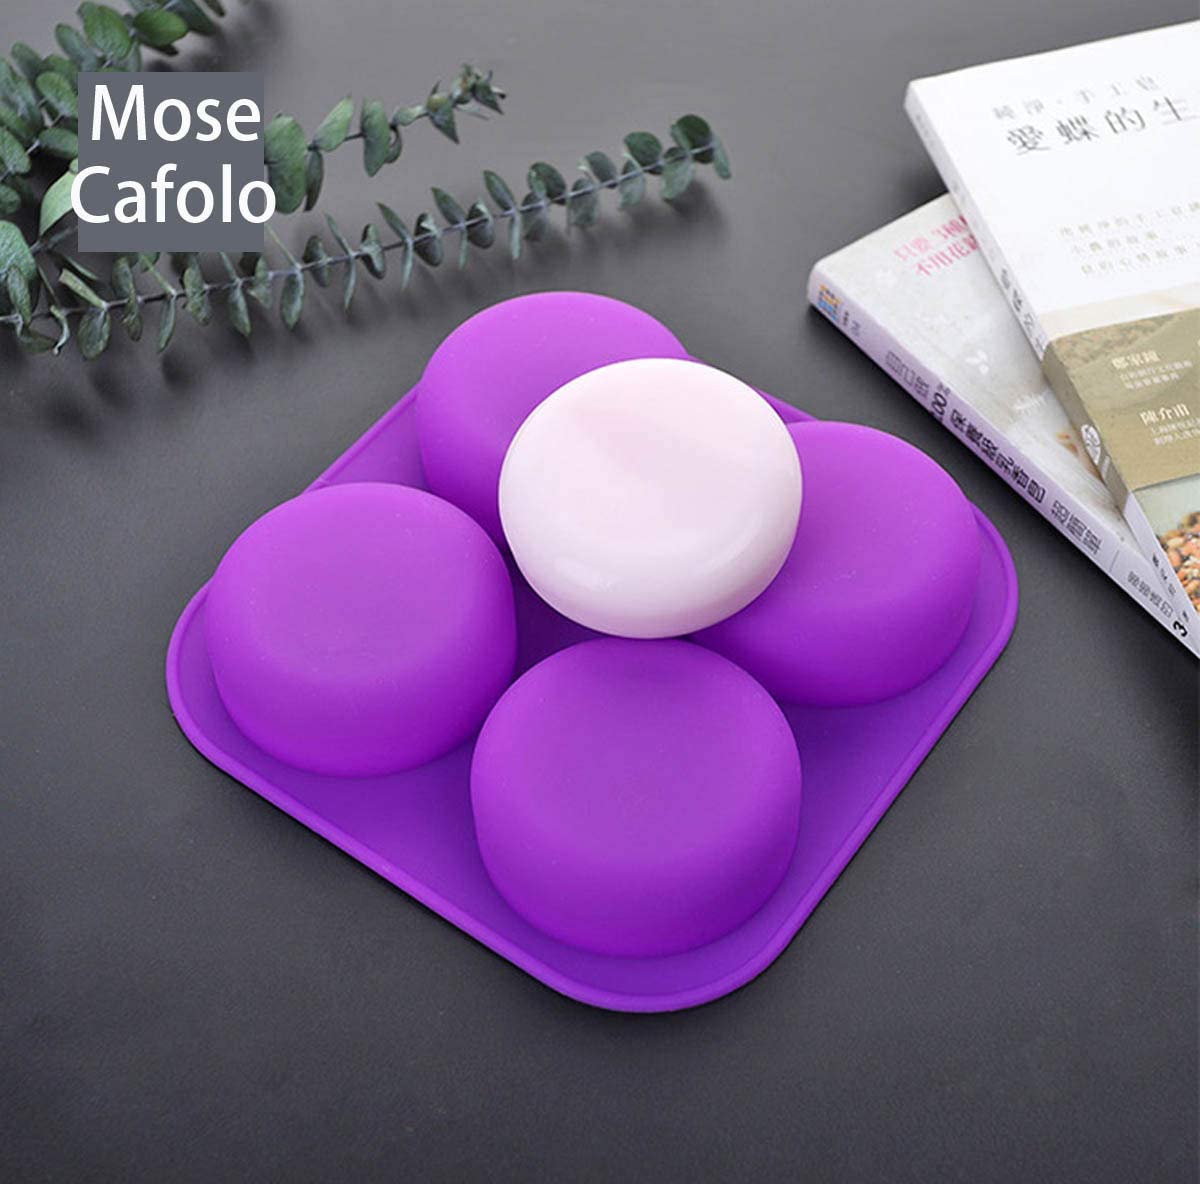 4-cavity round handmade soap mold food-grade silicone mold, chocolate mold,  creative cake mold - Silicone Molds Wholesale & Retail - Fondant, Soap,  Candy, DIY Cake Molds